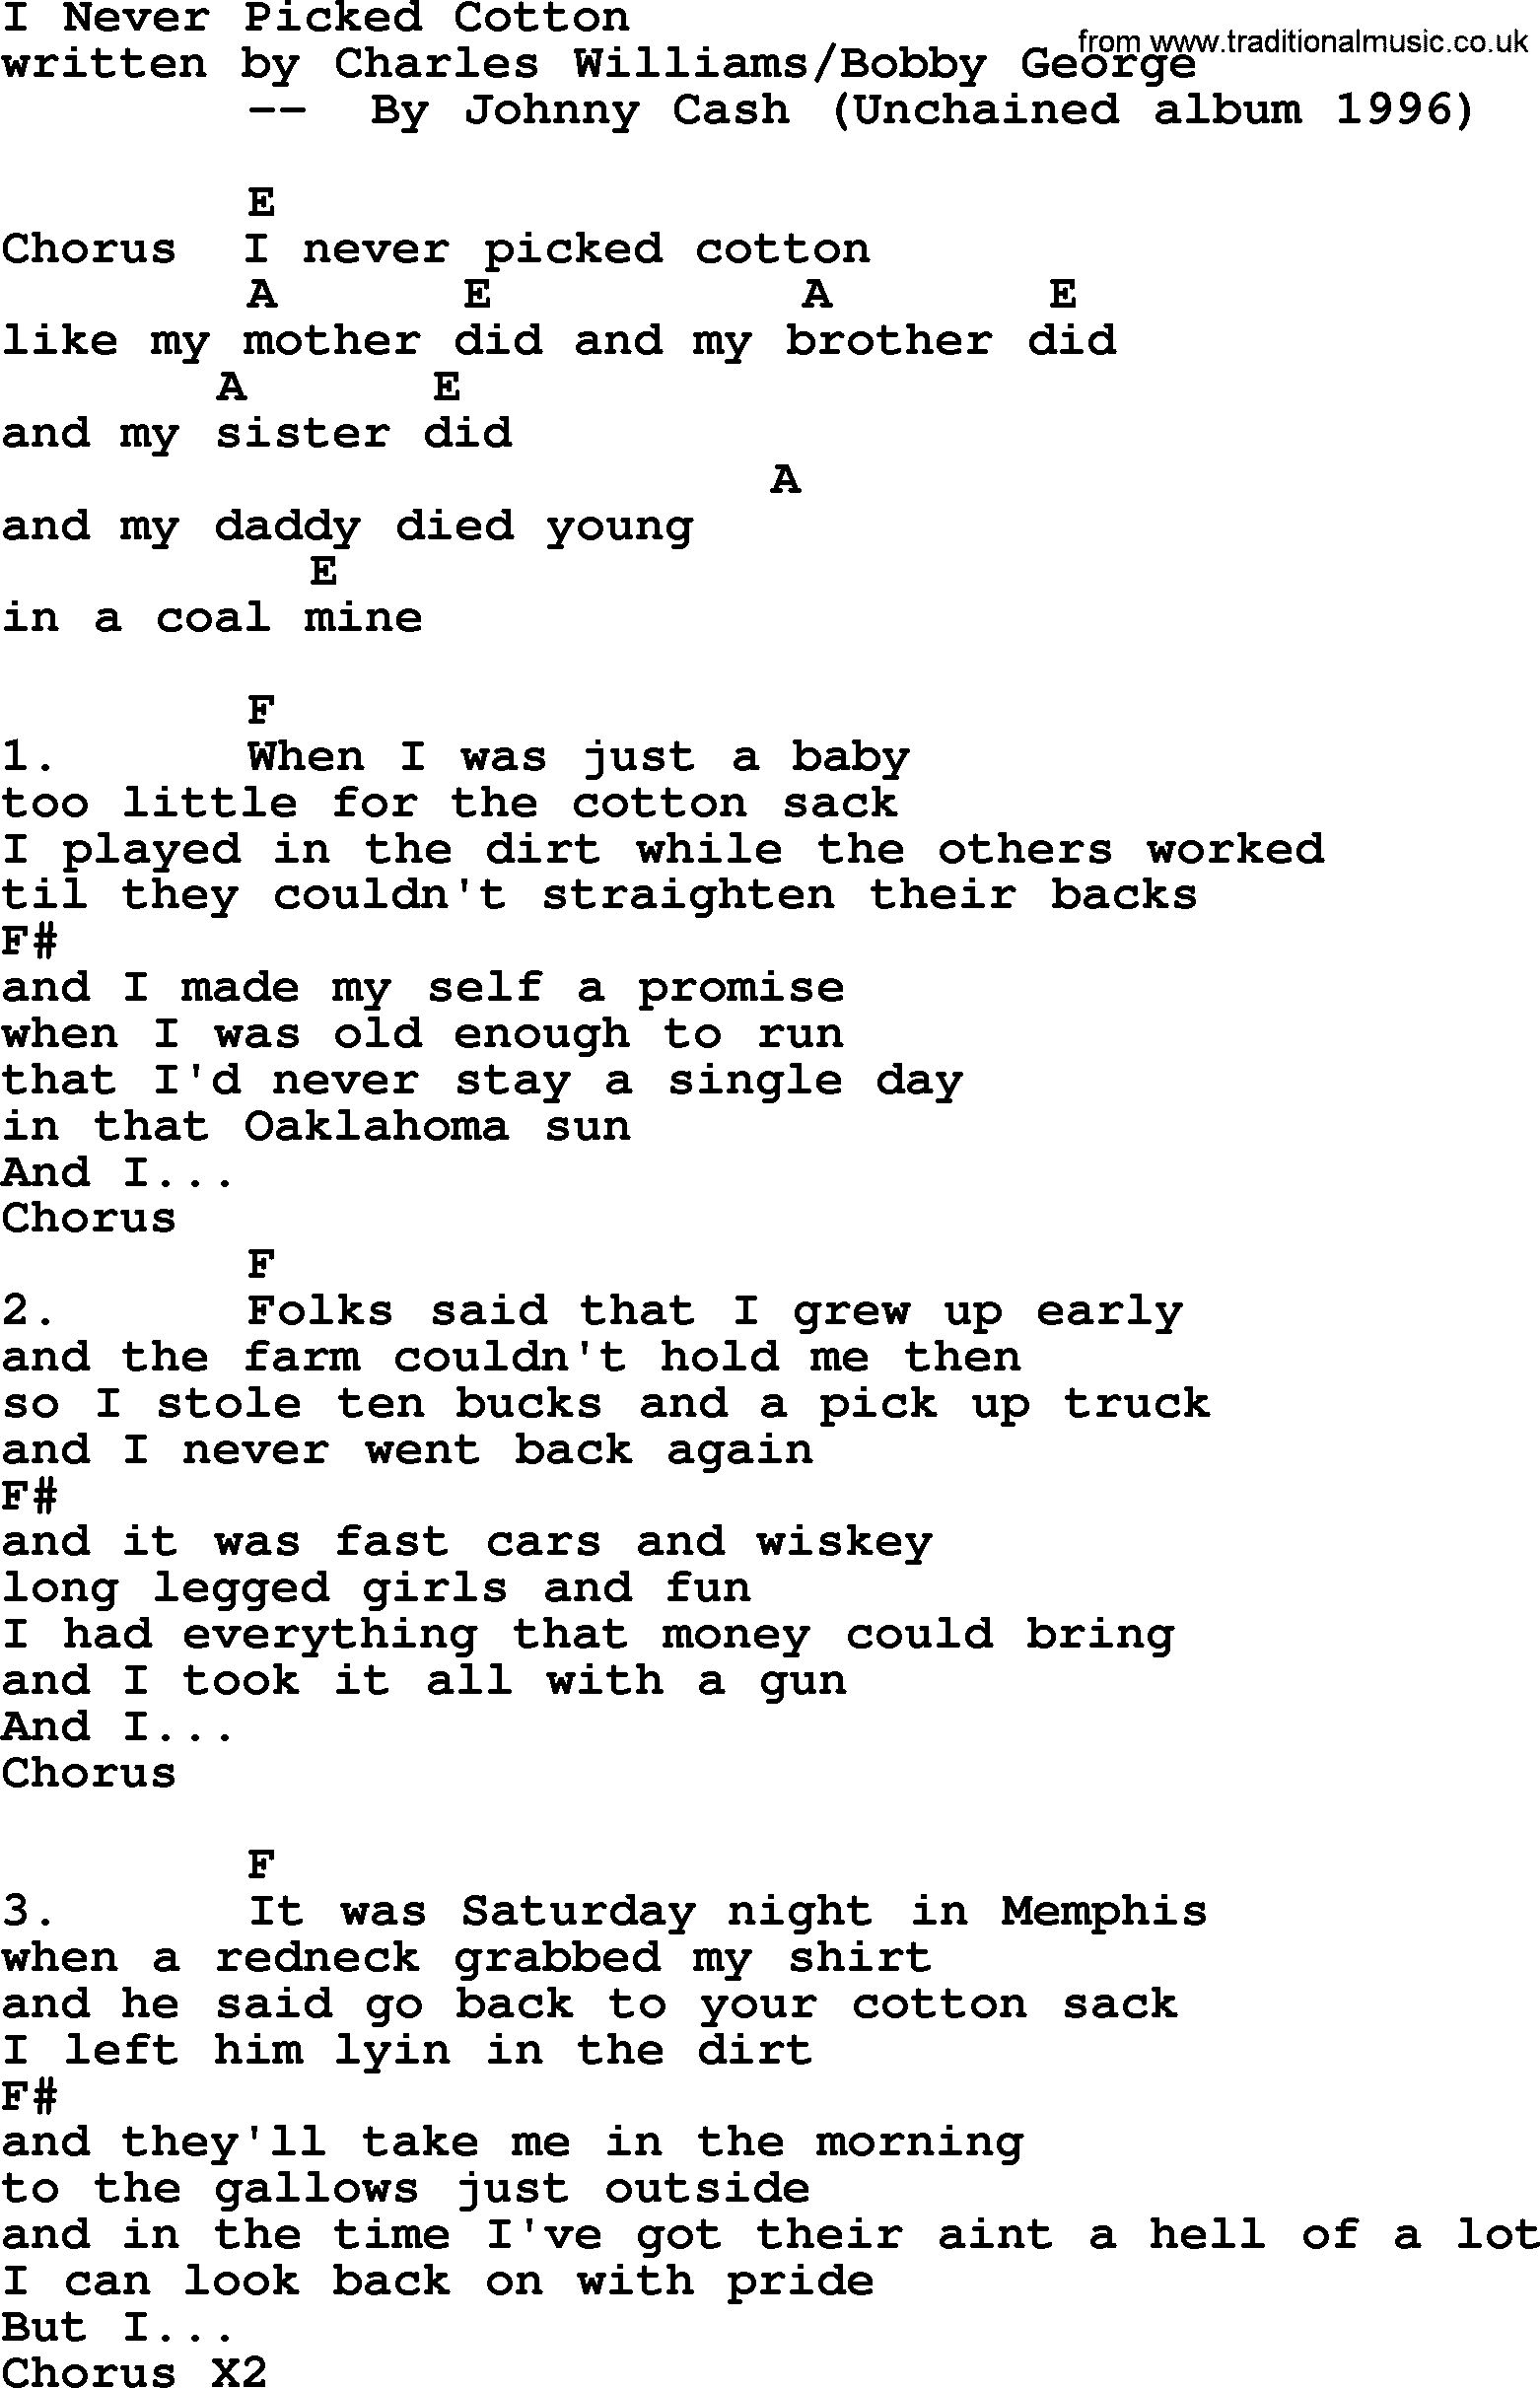 Johnny Cash song I Never Picked Cotton, lyrics and chords